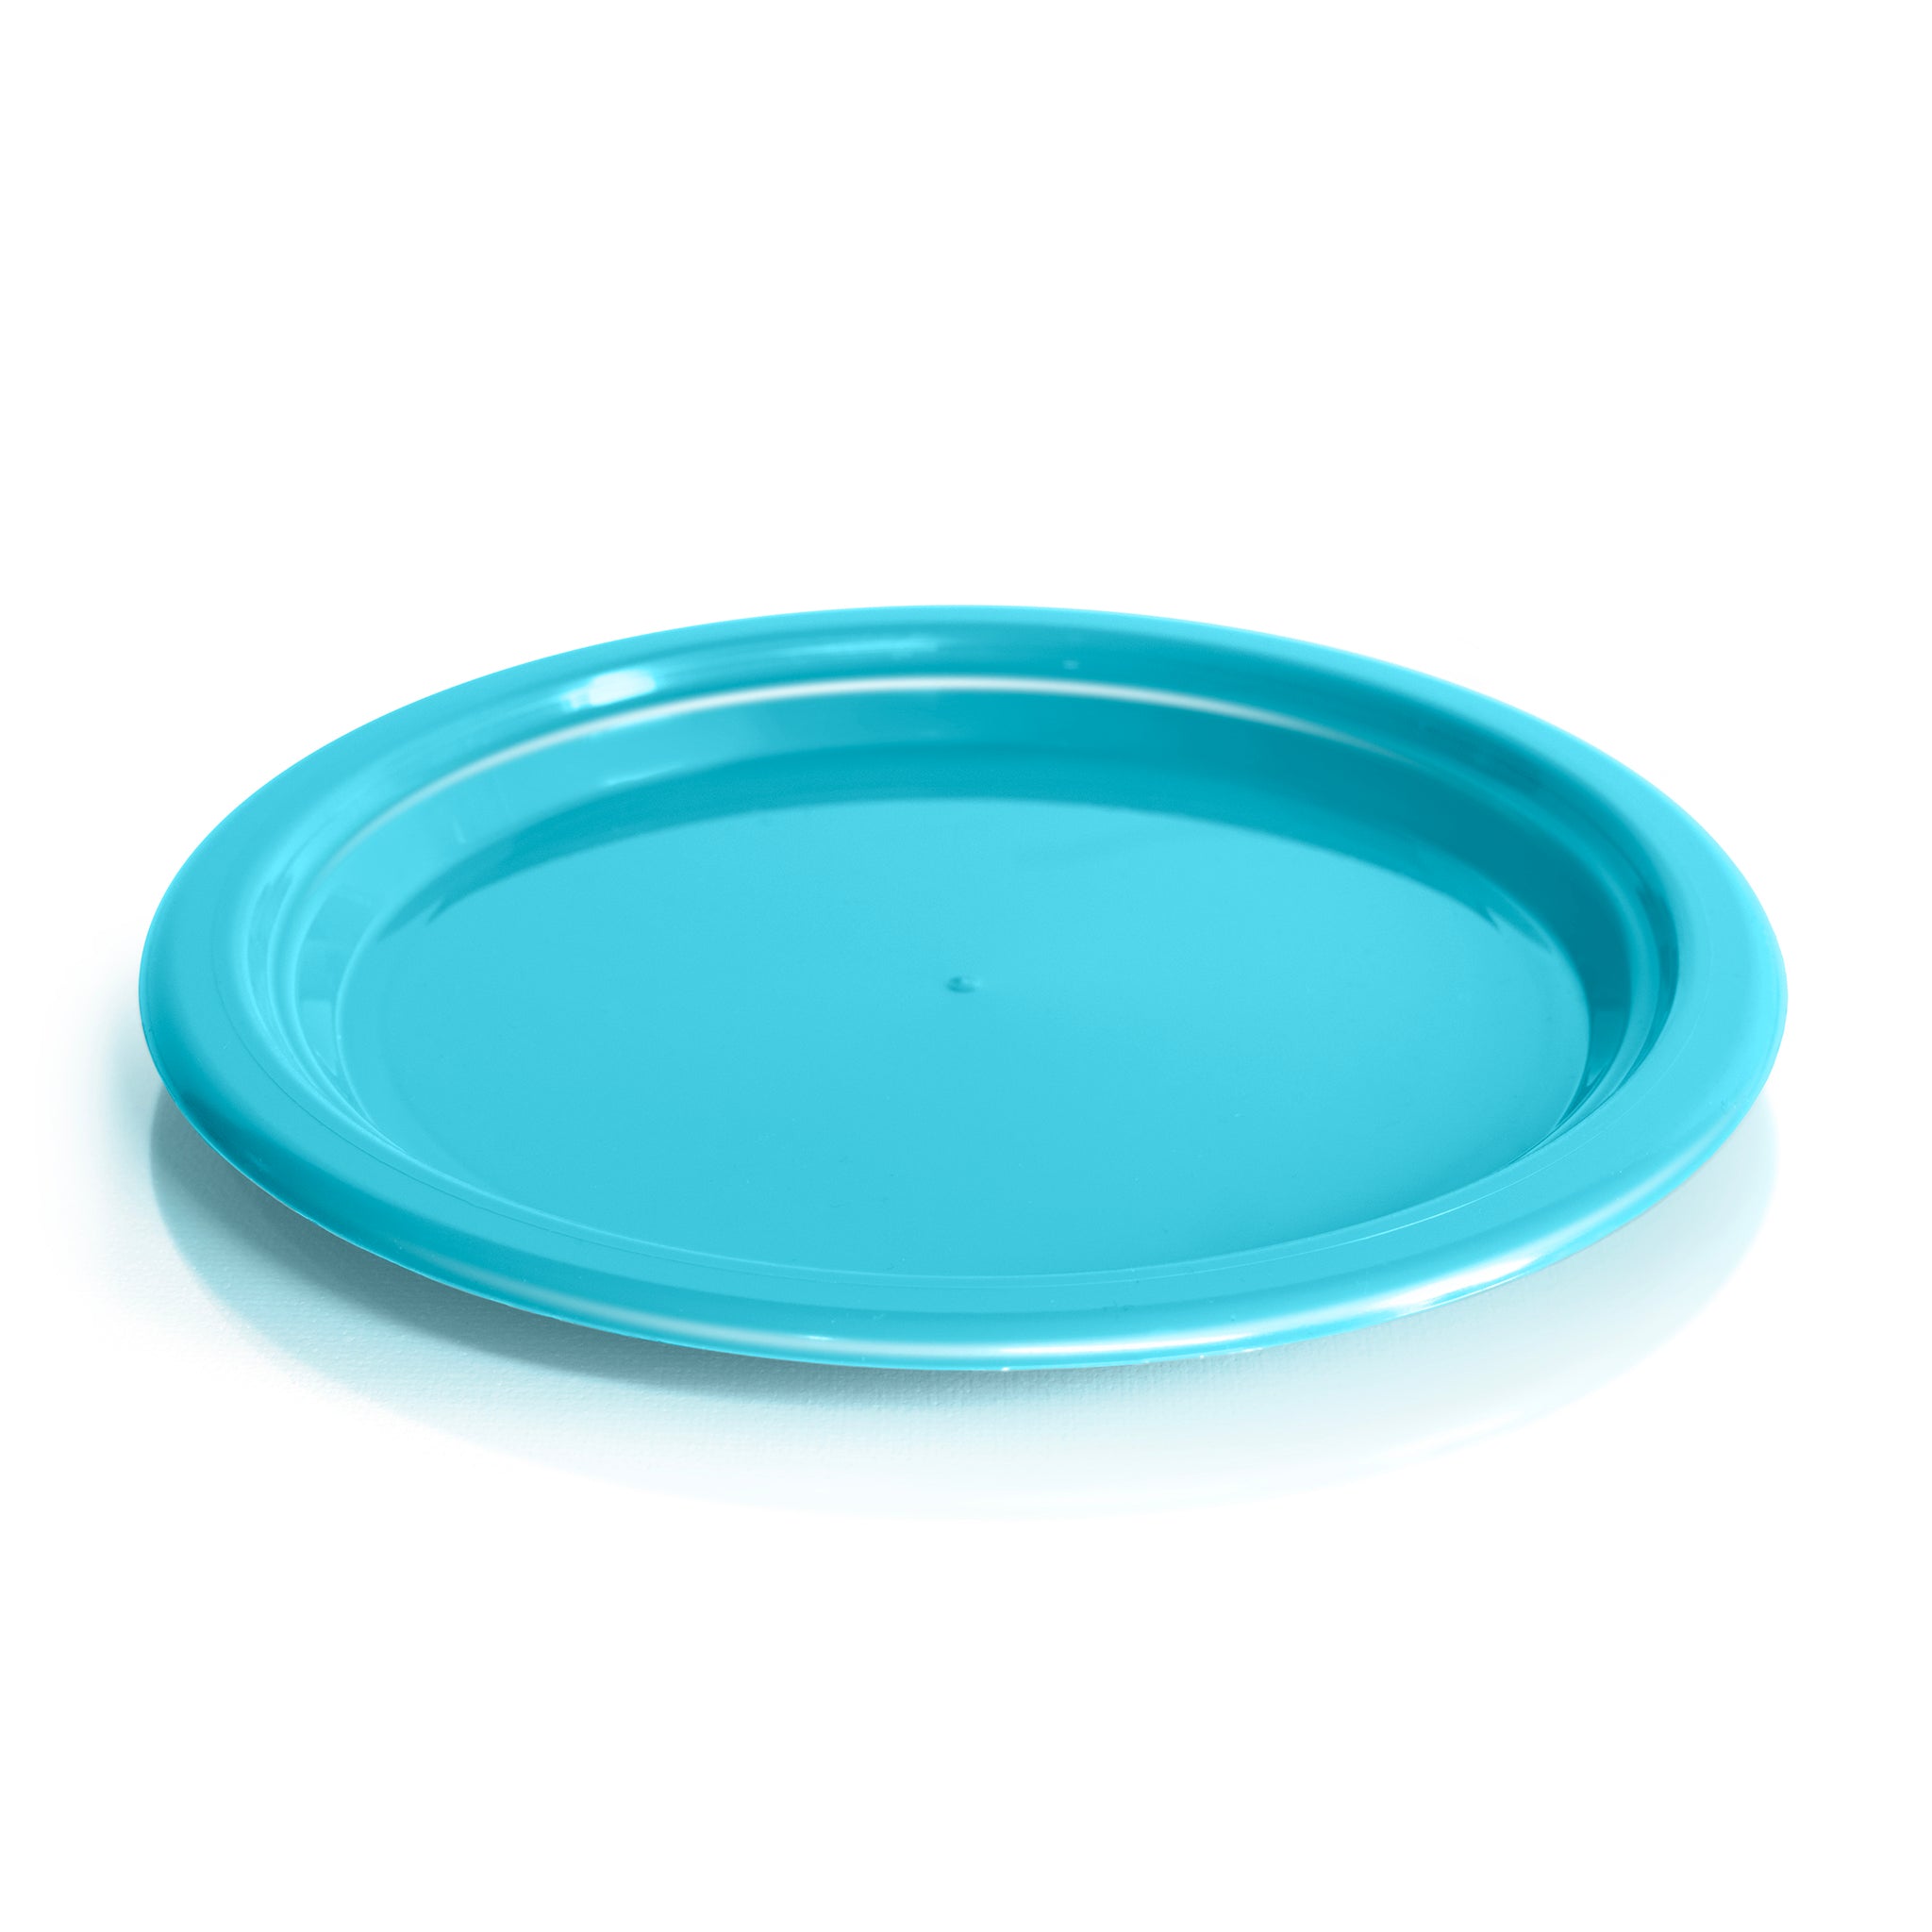 reusable camping plates made of recycled plastic